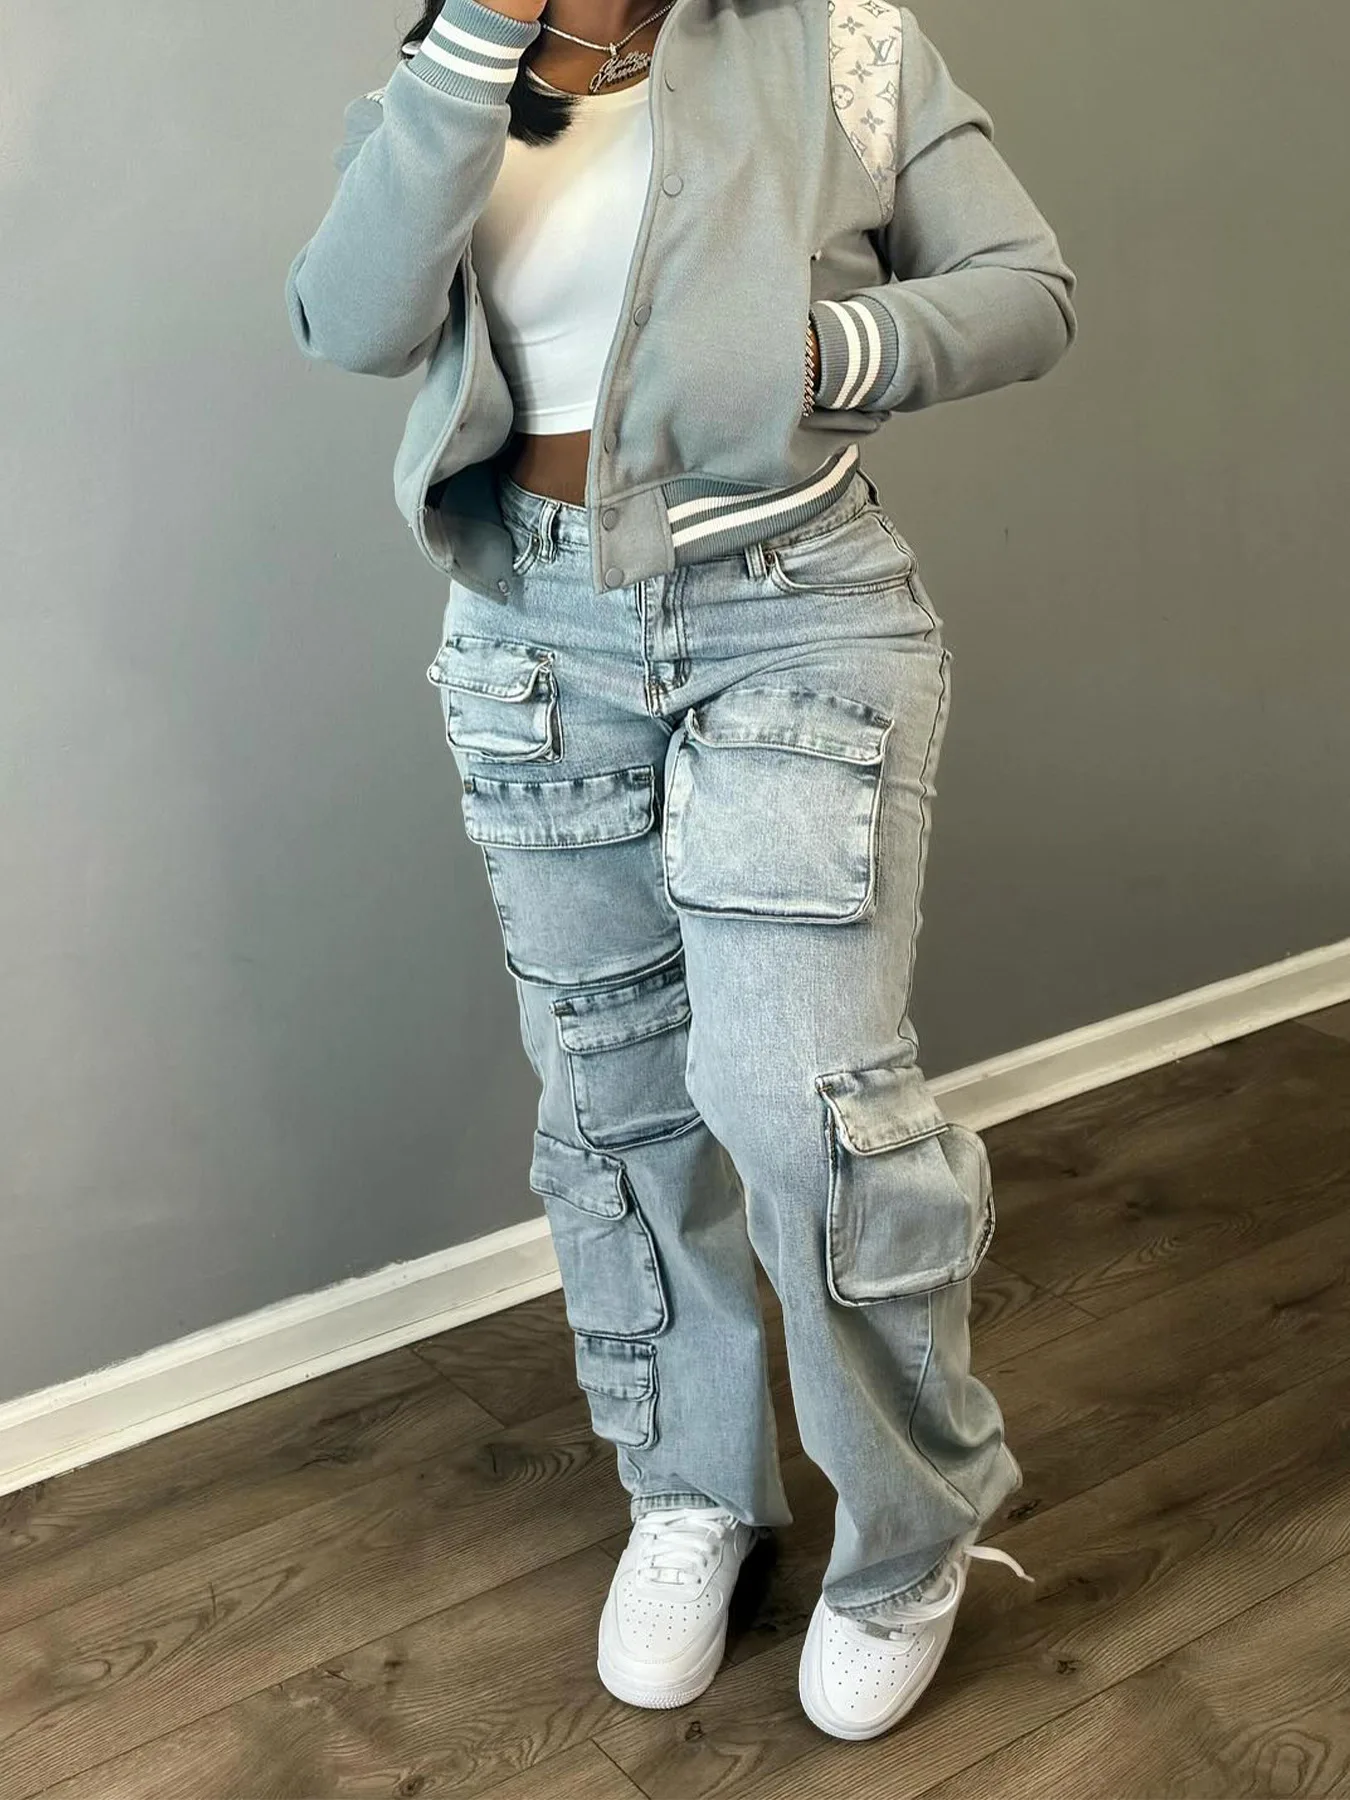 

Casual Women Jeans Denims Cargo Pants Streetwear High Streetwear Long Pants Clothes For Women Outfit